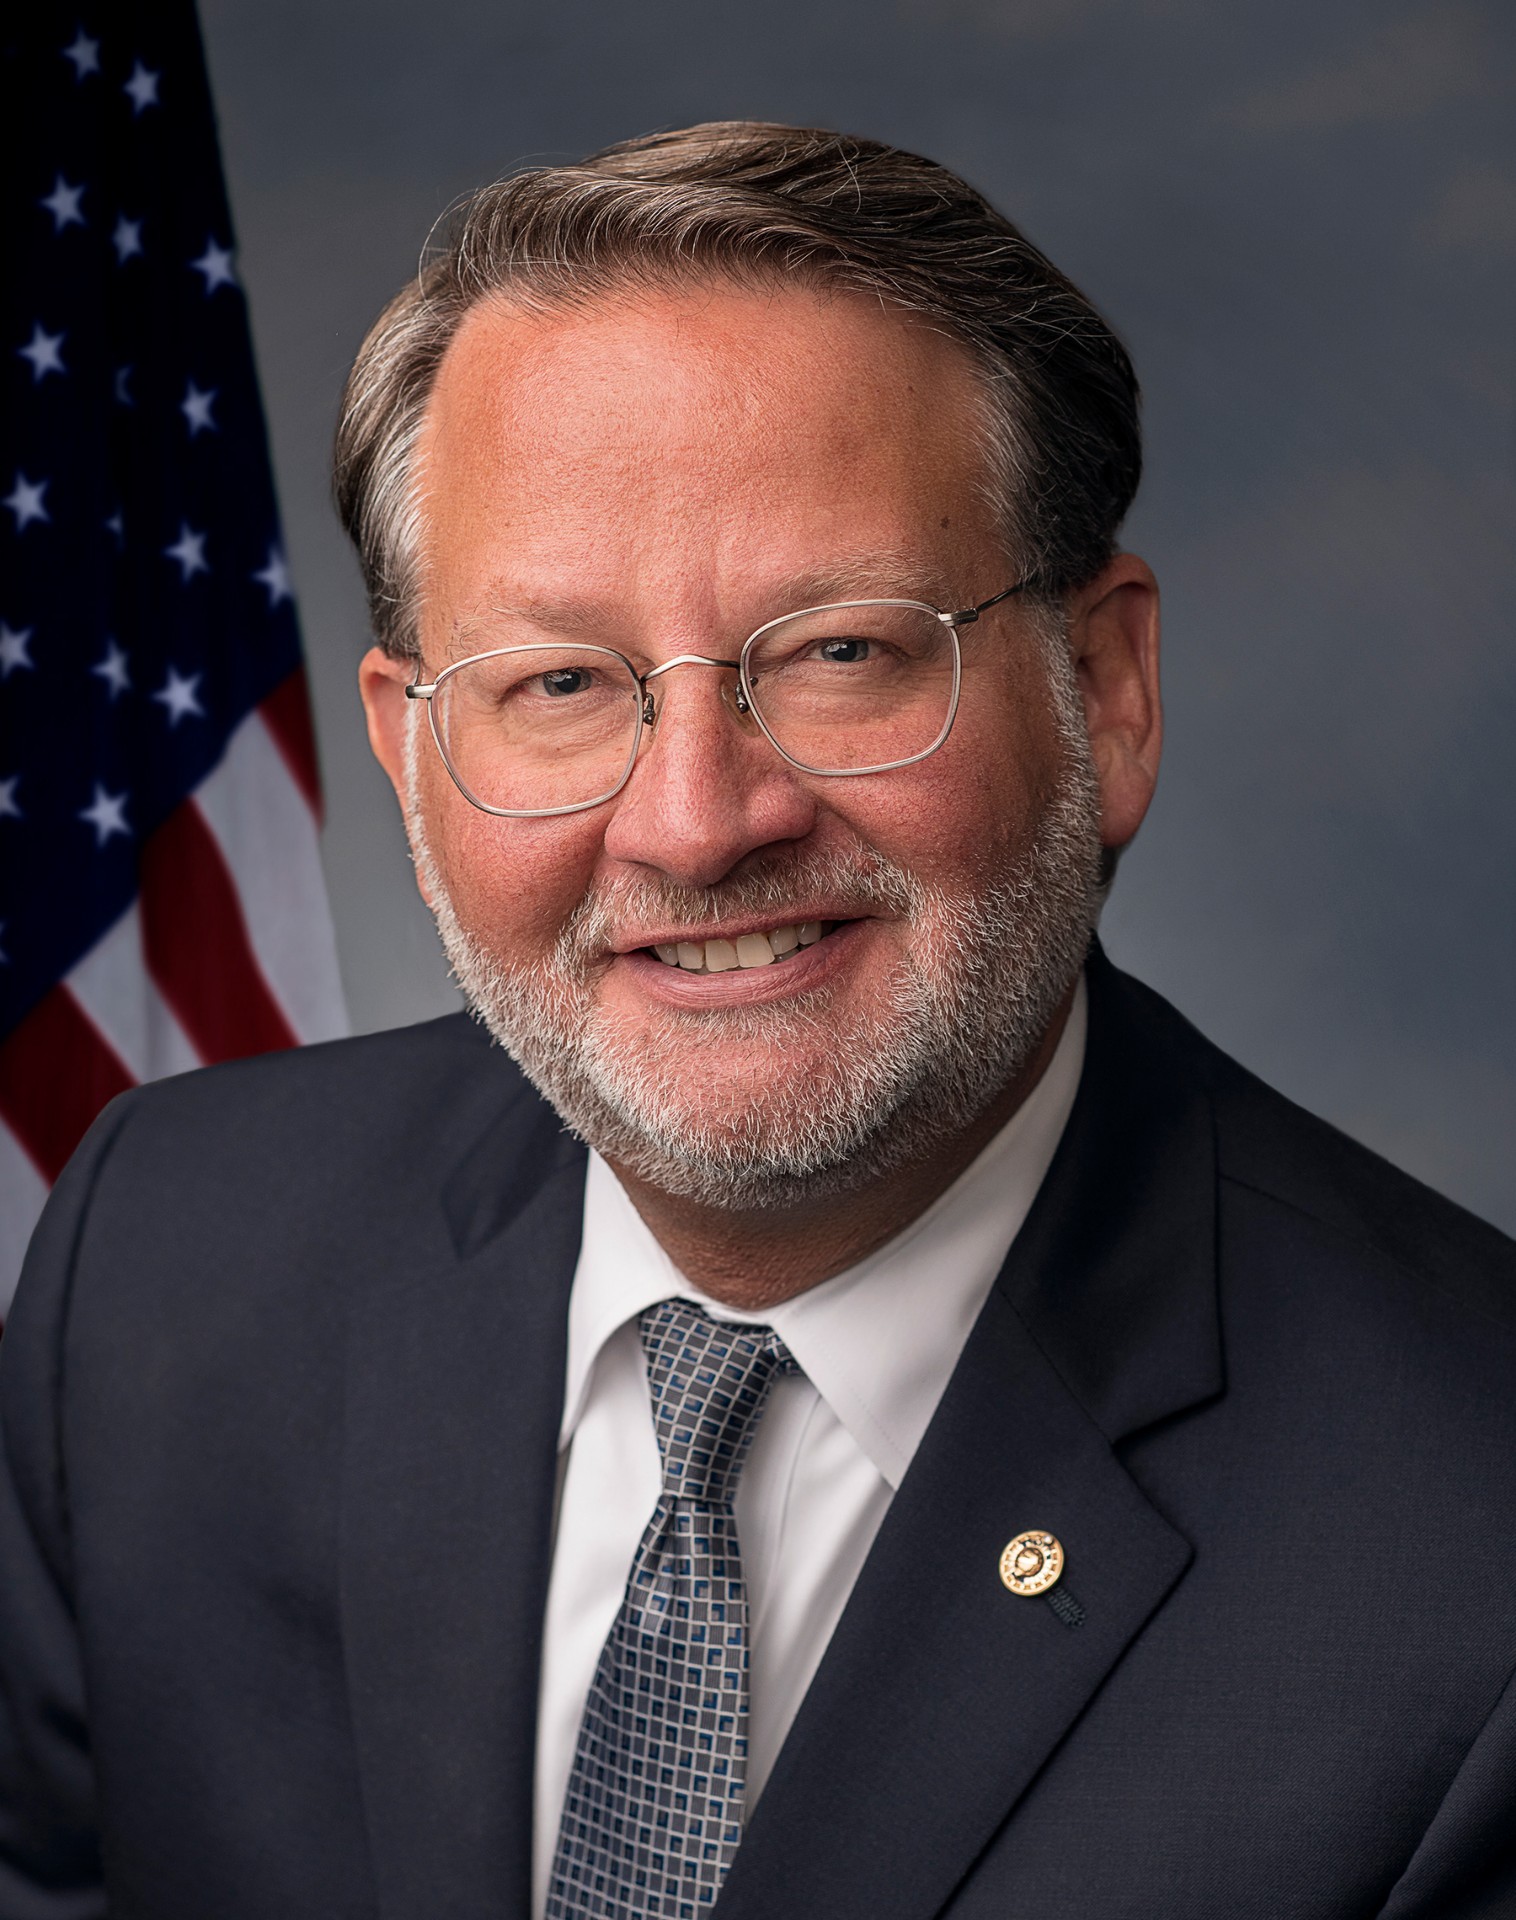 NABPAC supported Sen. Gary Peters (MI) with an in-person fundraiser.